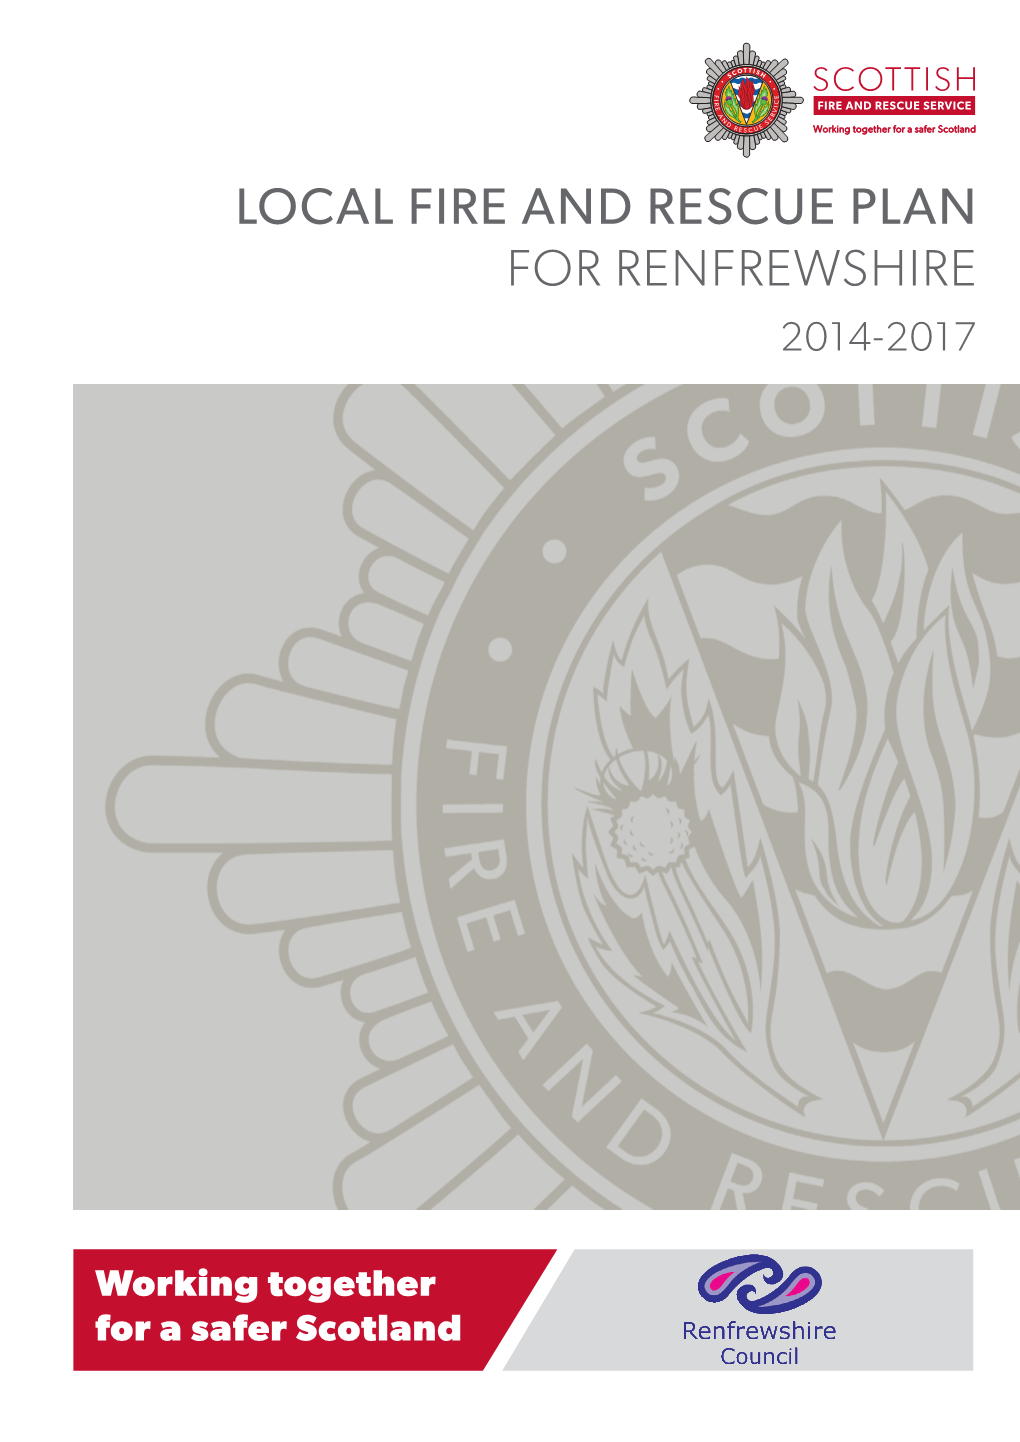 Local Fire and Rescue Plan for Renfrewshire 2014-2017